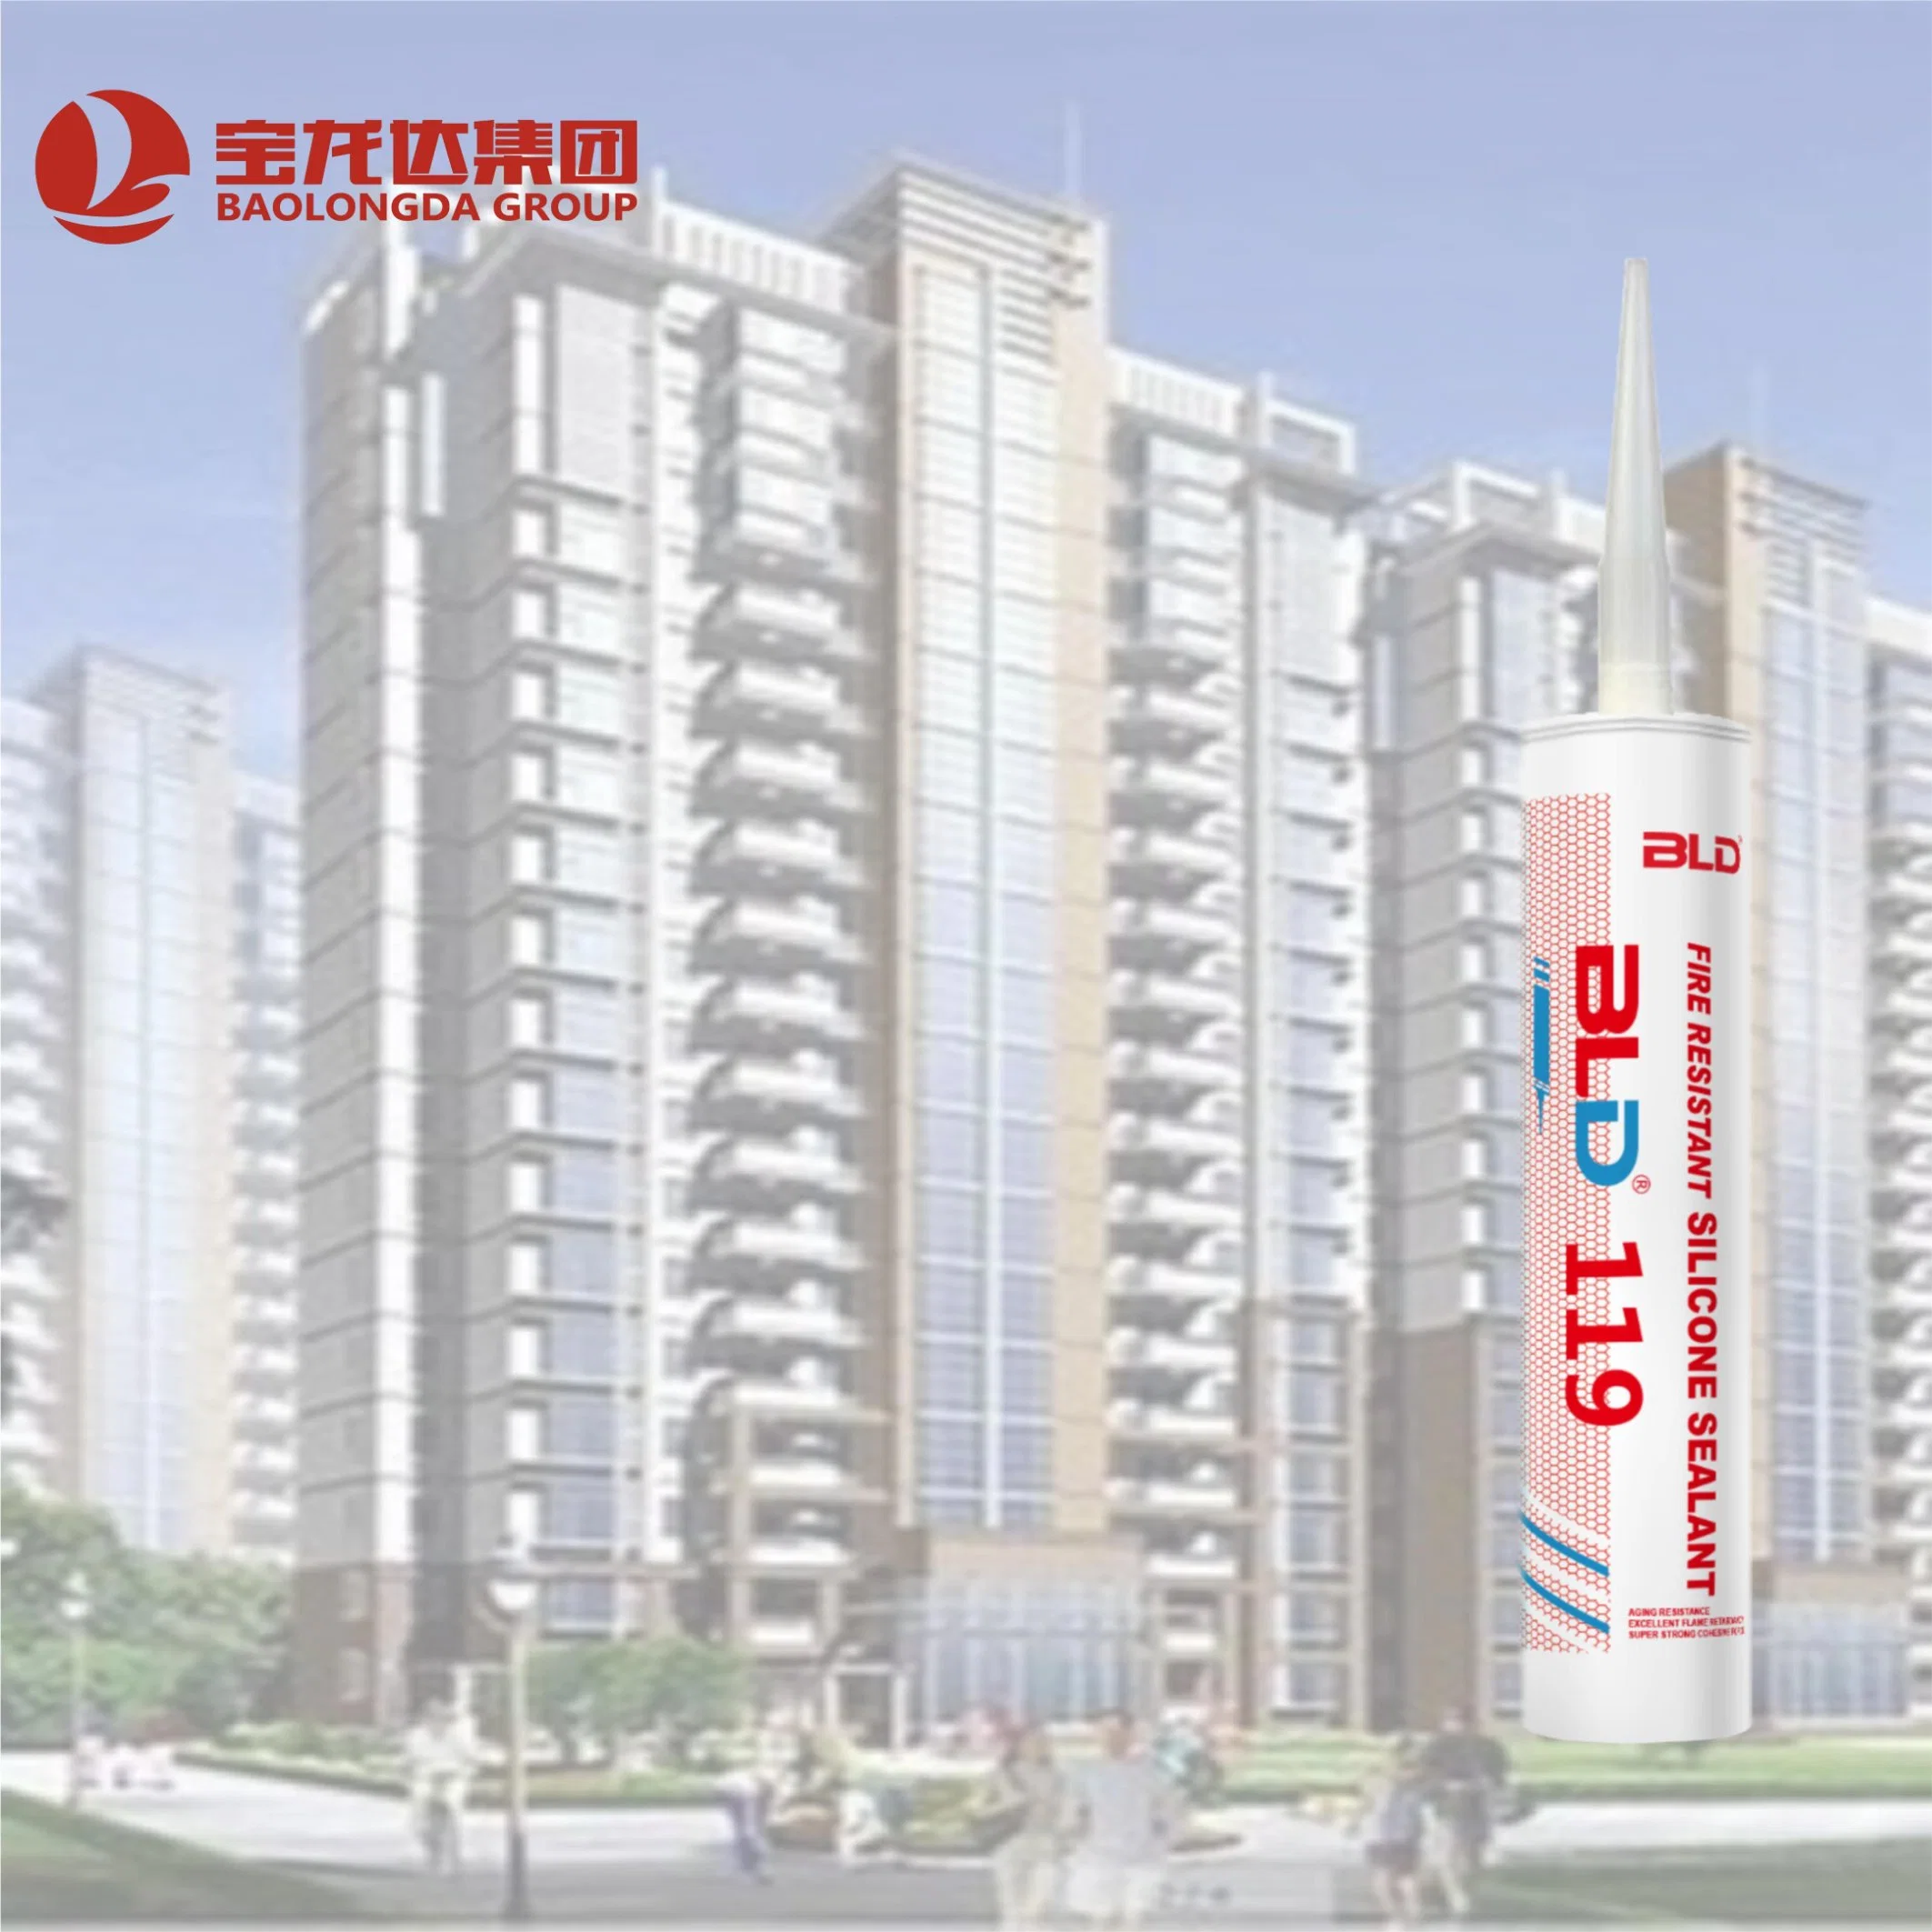 Silicone Plastic Material Fire-Resistant Fireproof Adhesive Silicone Sealant for Building Construction